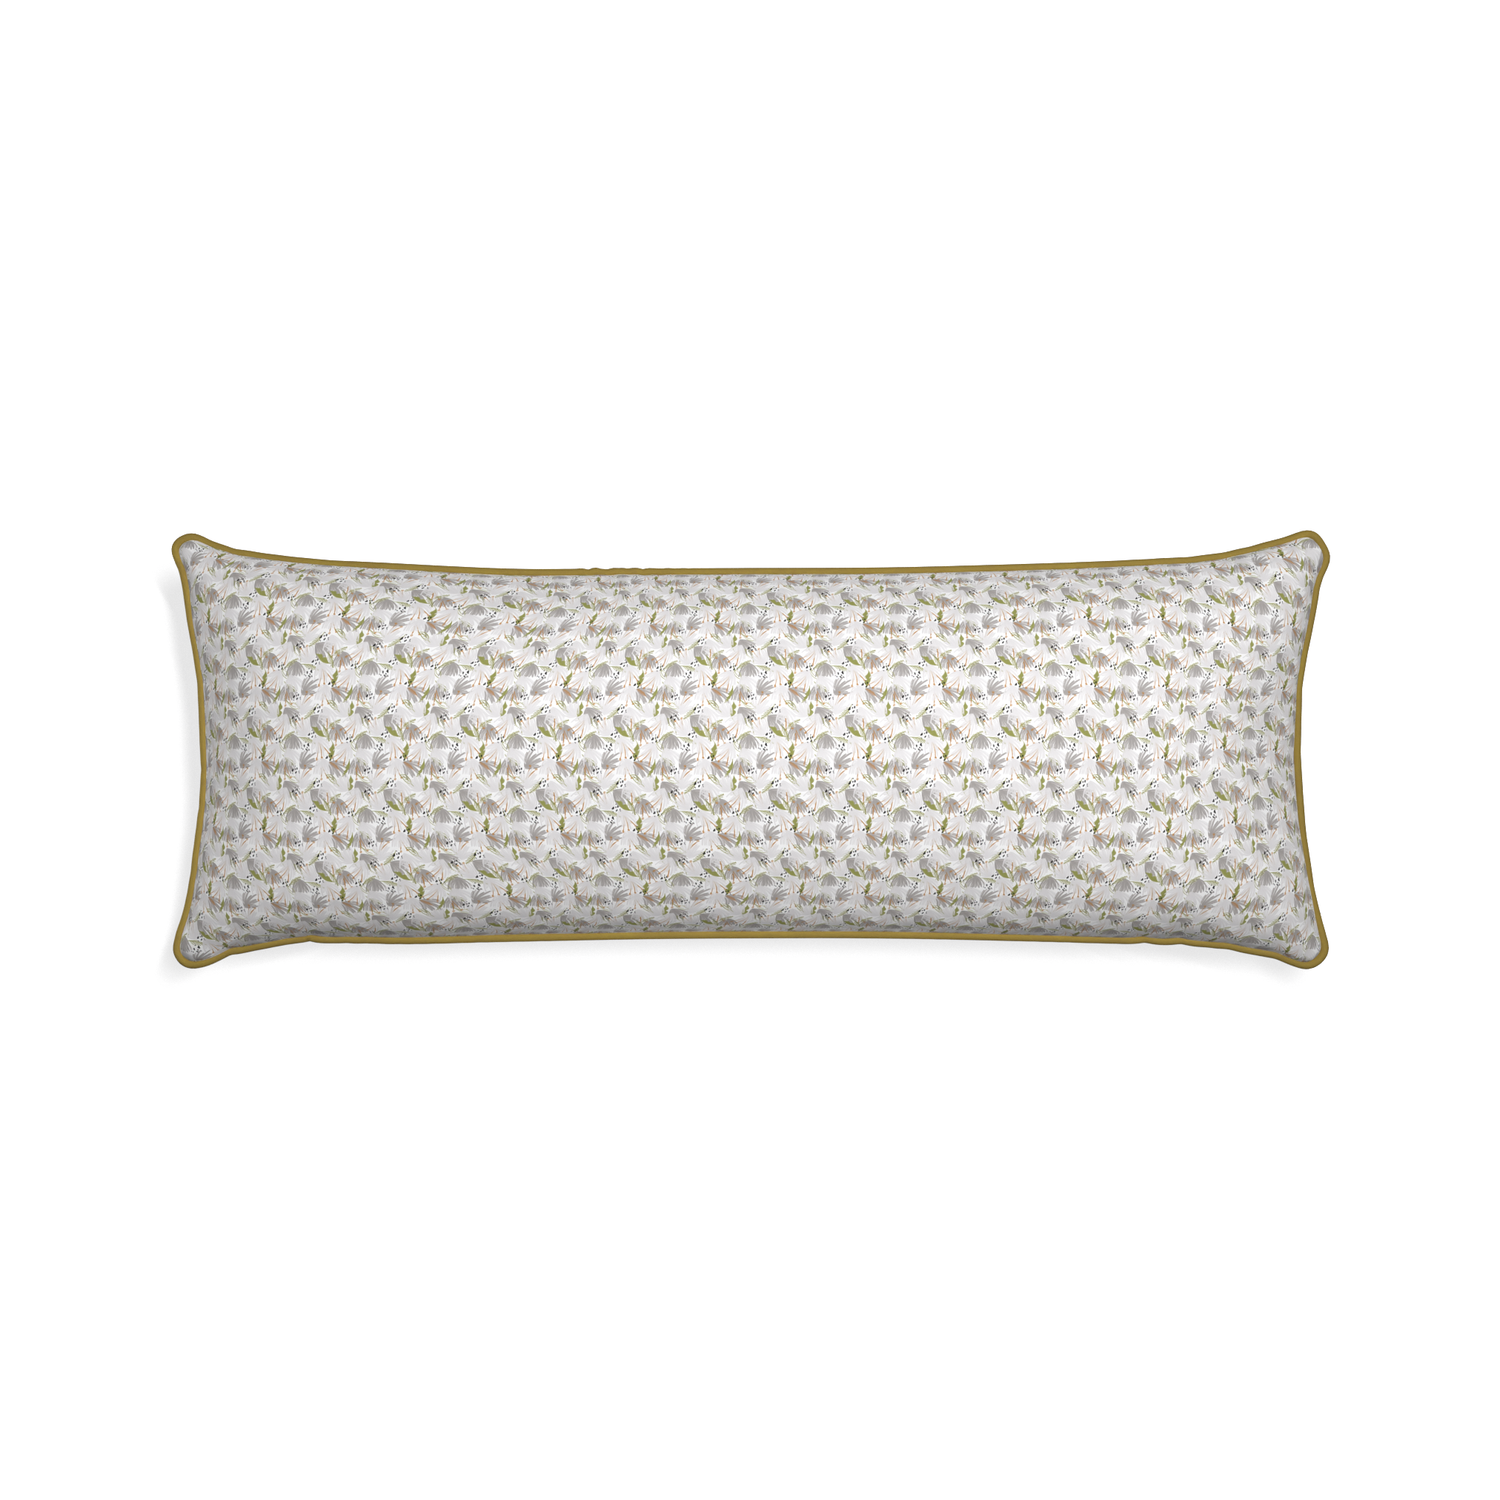 Xl-lumbar eden grey custom grey floralpillow with c piping on white background